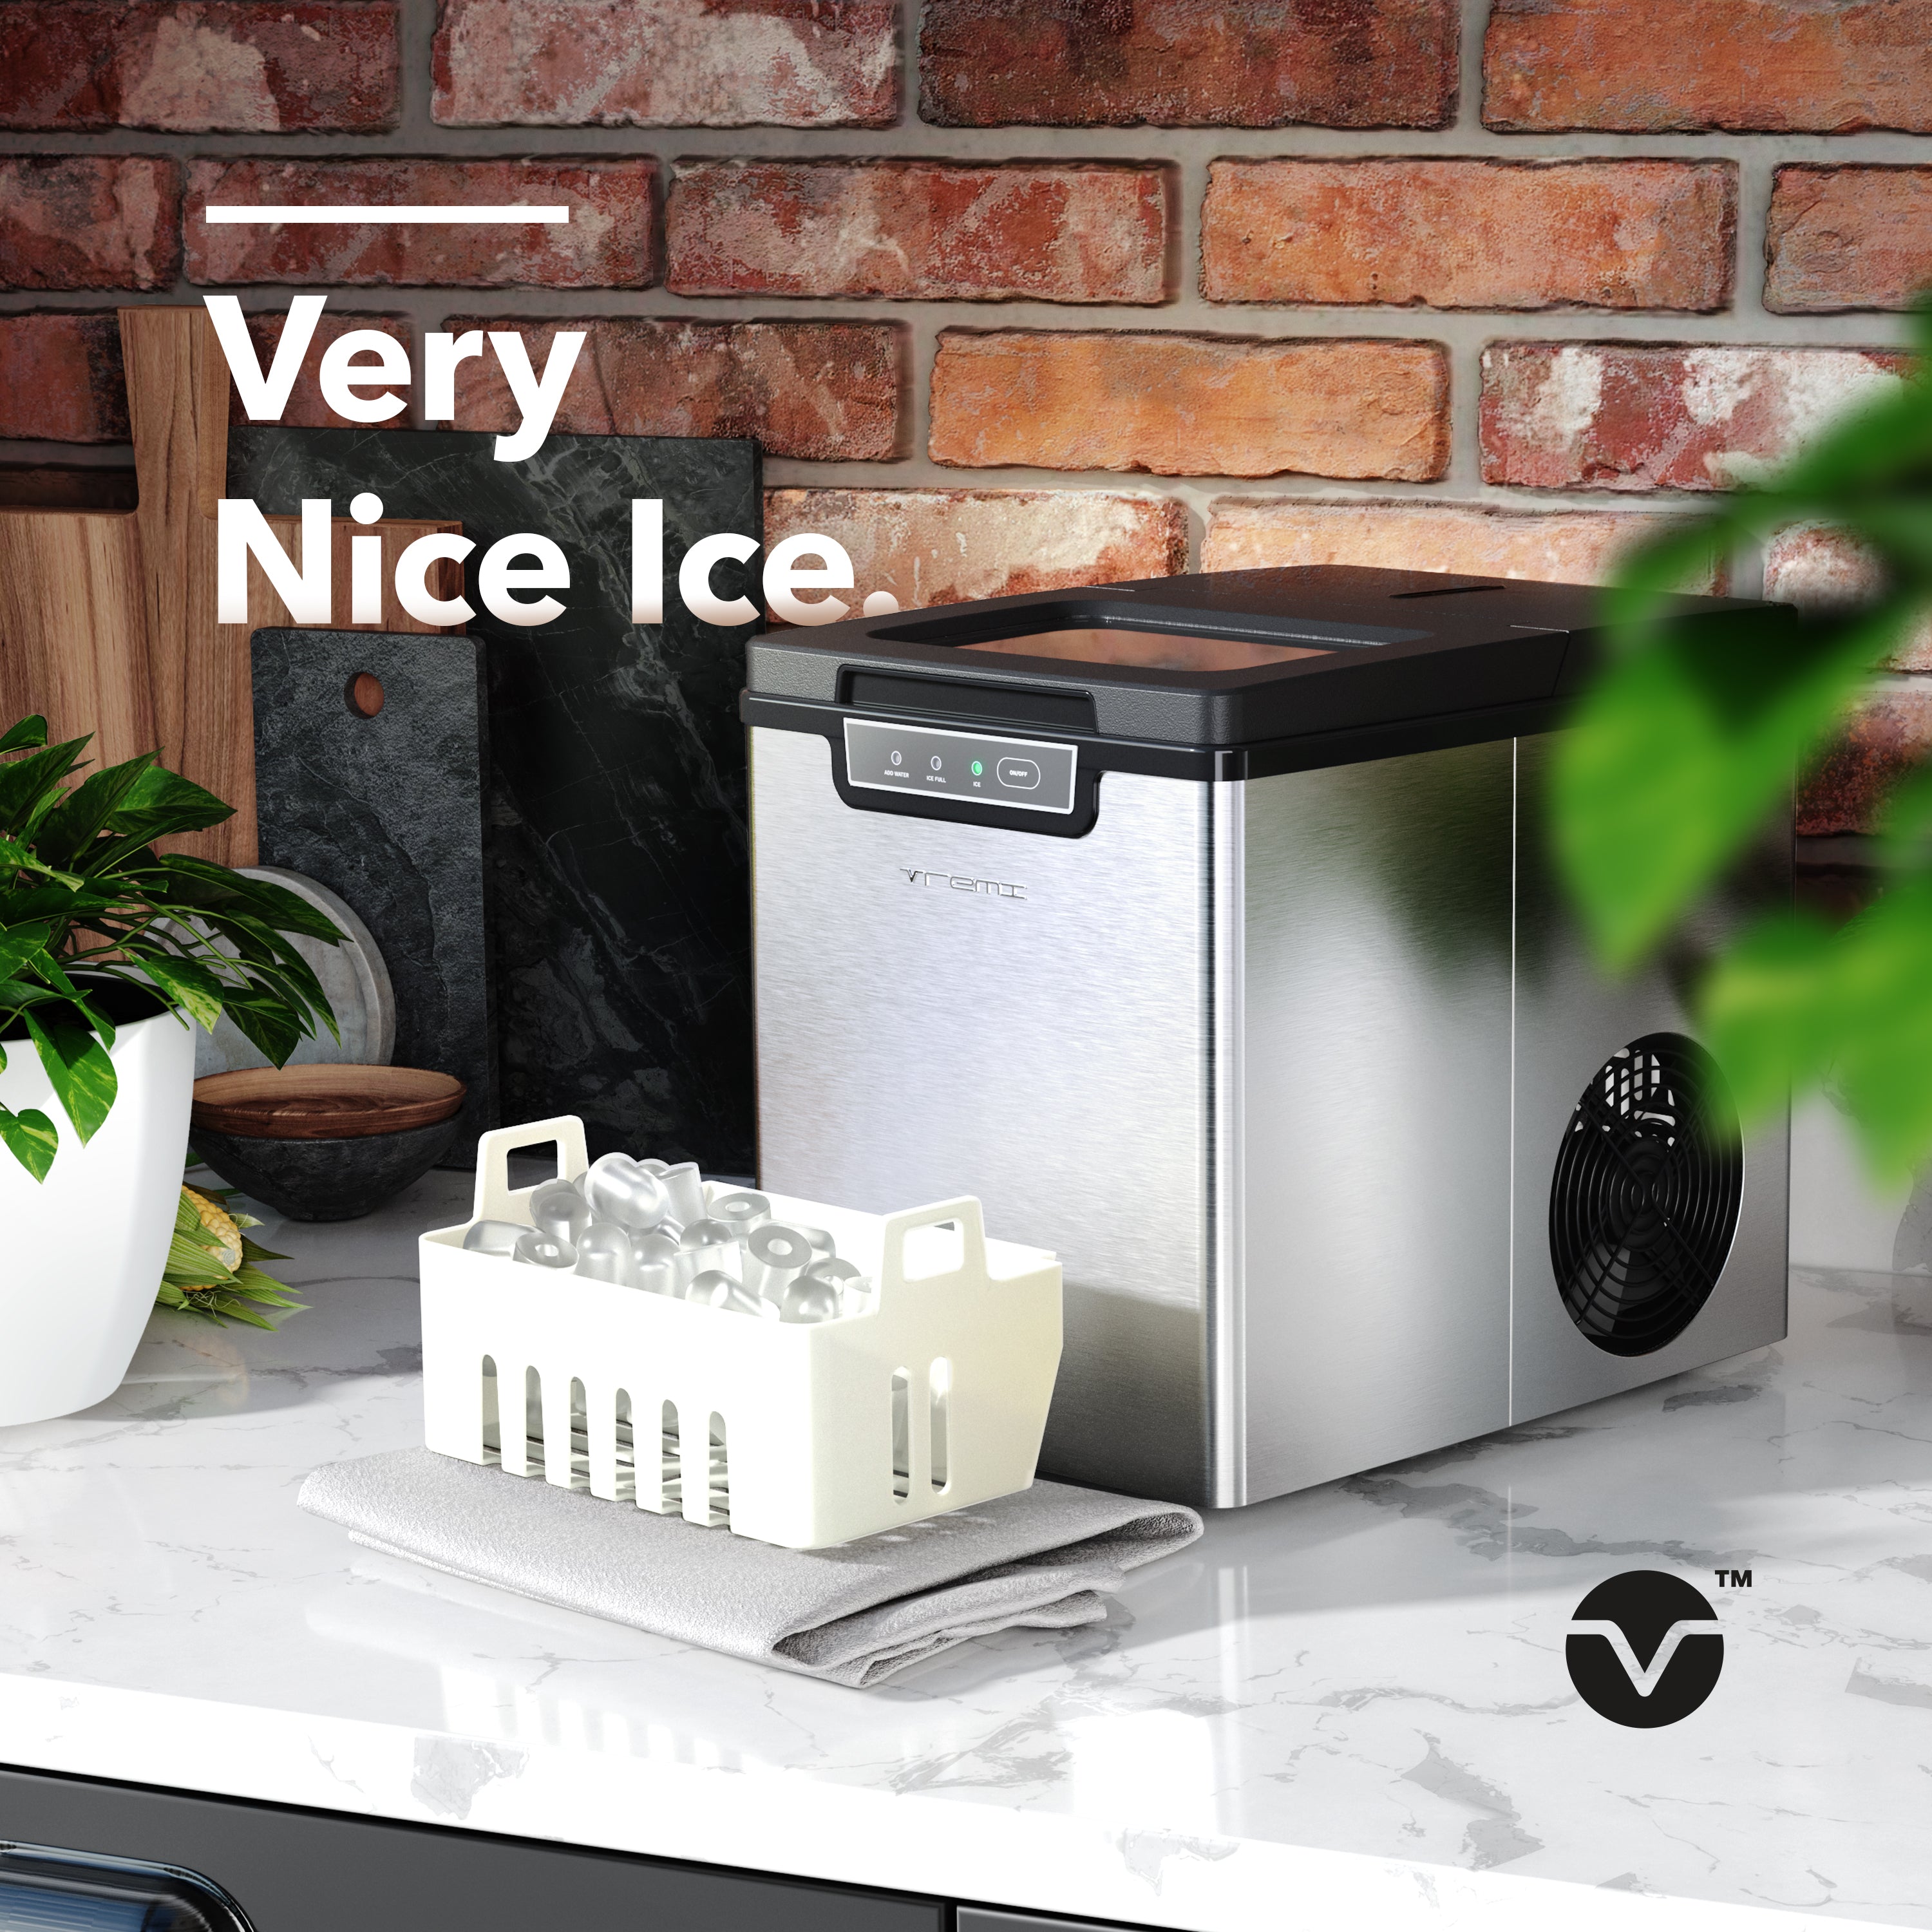 Vremi® Portable Ice Cube Maker - Produces 26 Pounds of Ice Cube a Day